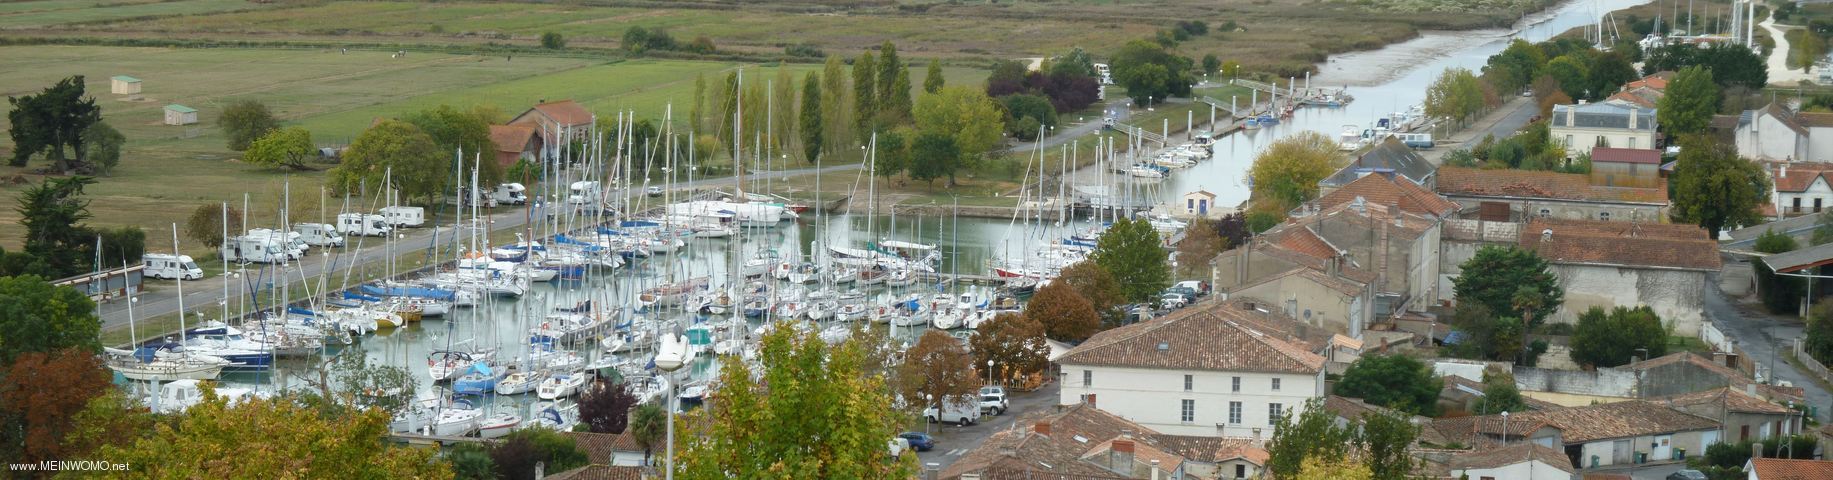  Parking and marina from above